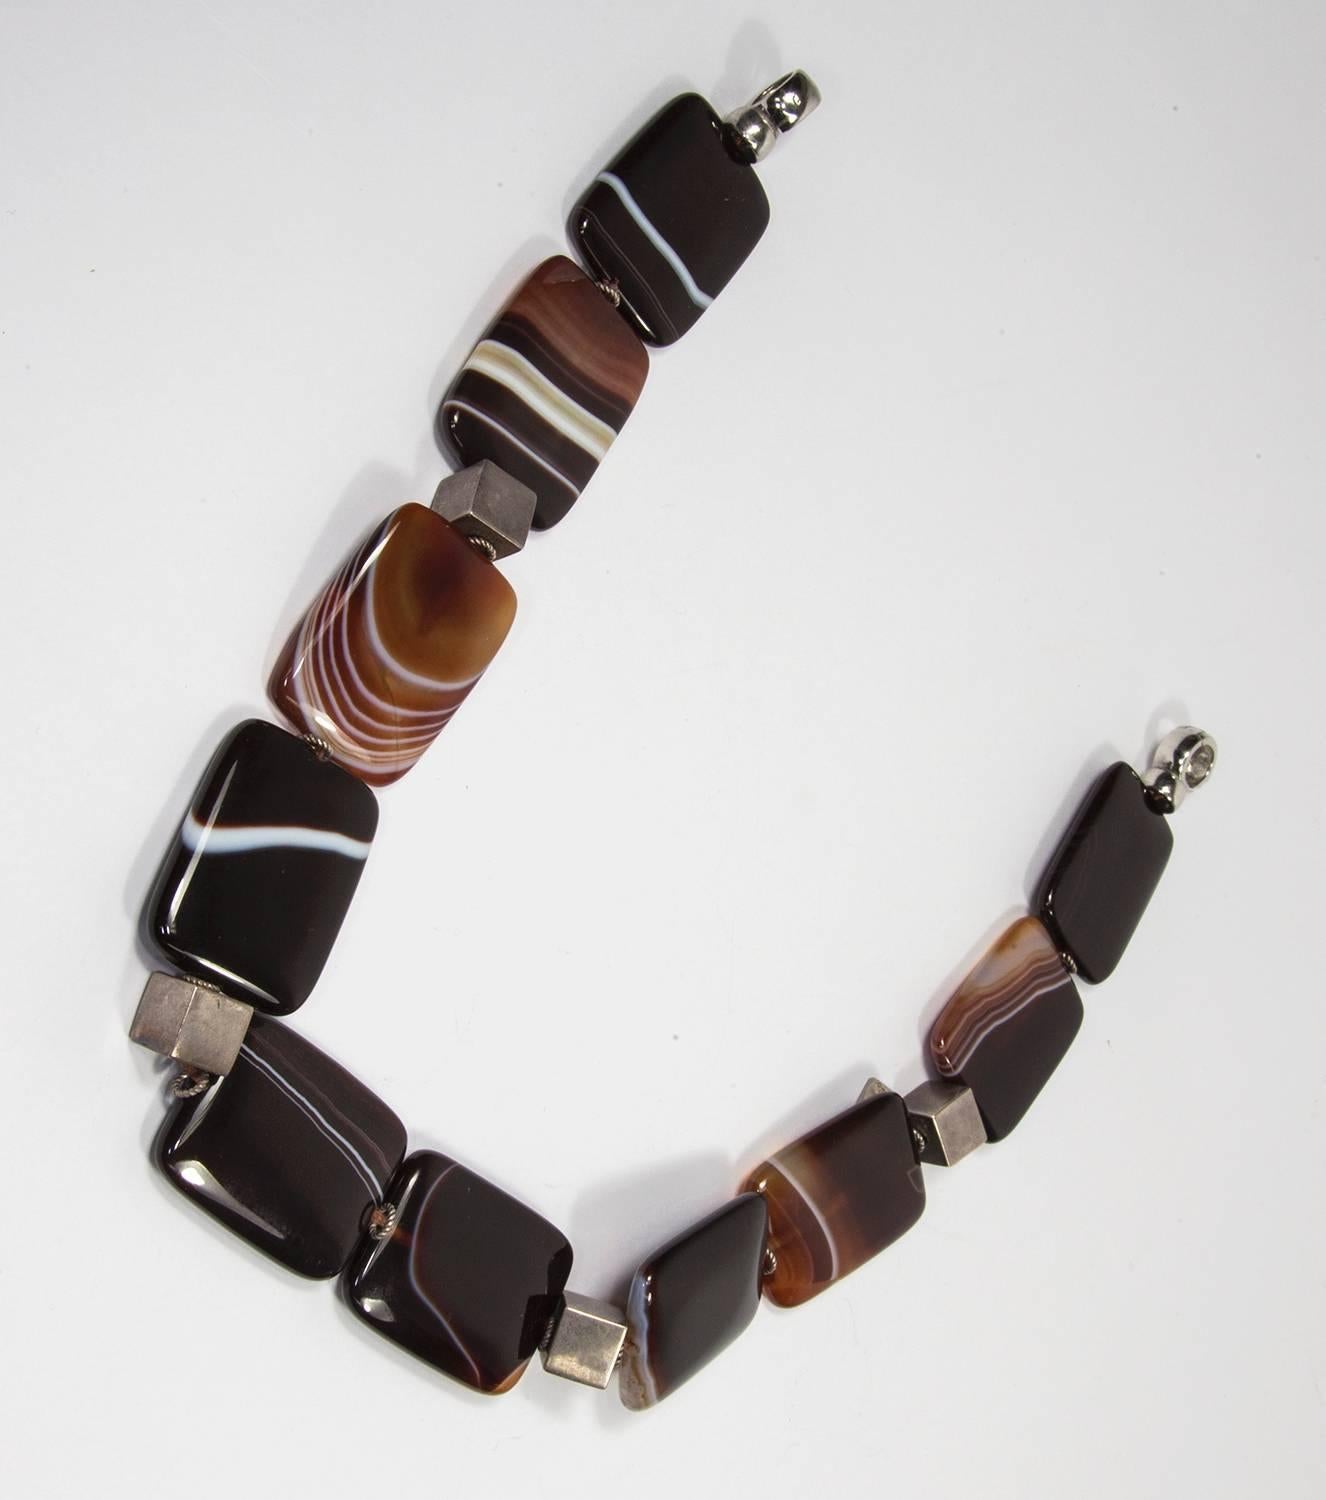 Beautifully designed large banded rectangular agate beads necklace inter spaced with sterling silver cubes and S/S clasp; agates are approx. 30.5mm x 40mm each; display beautiful colors ranging from chocolate to white to black on a waved, close